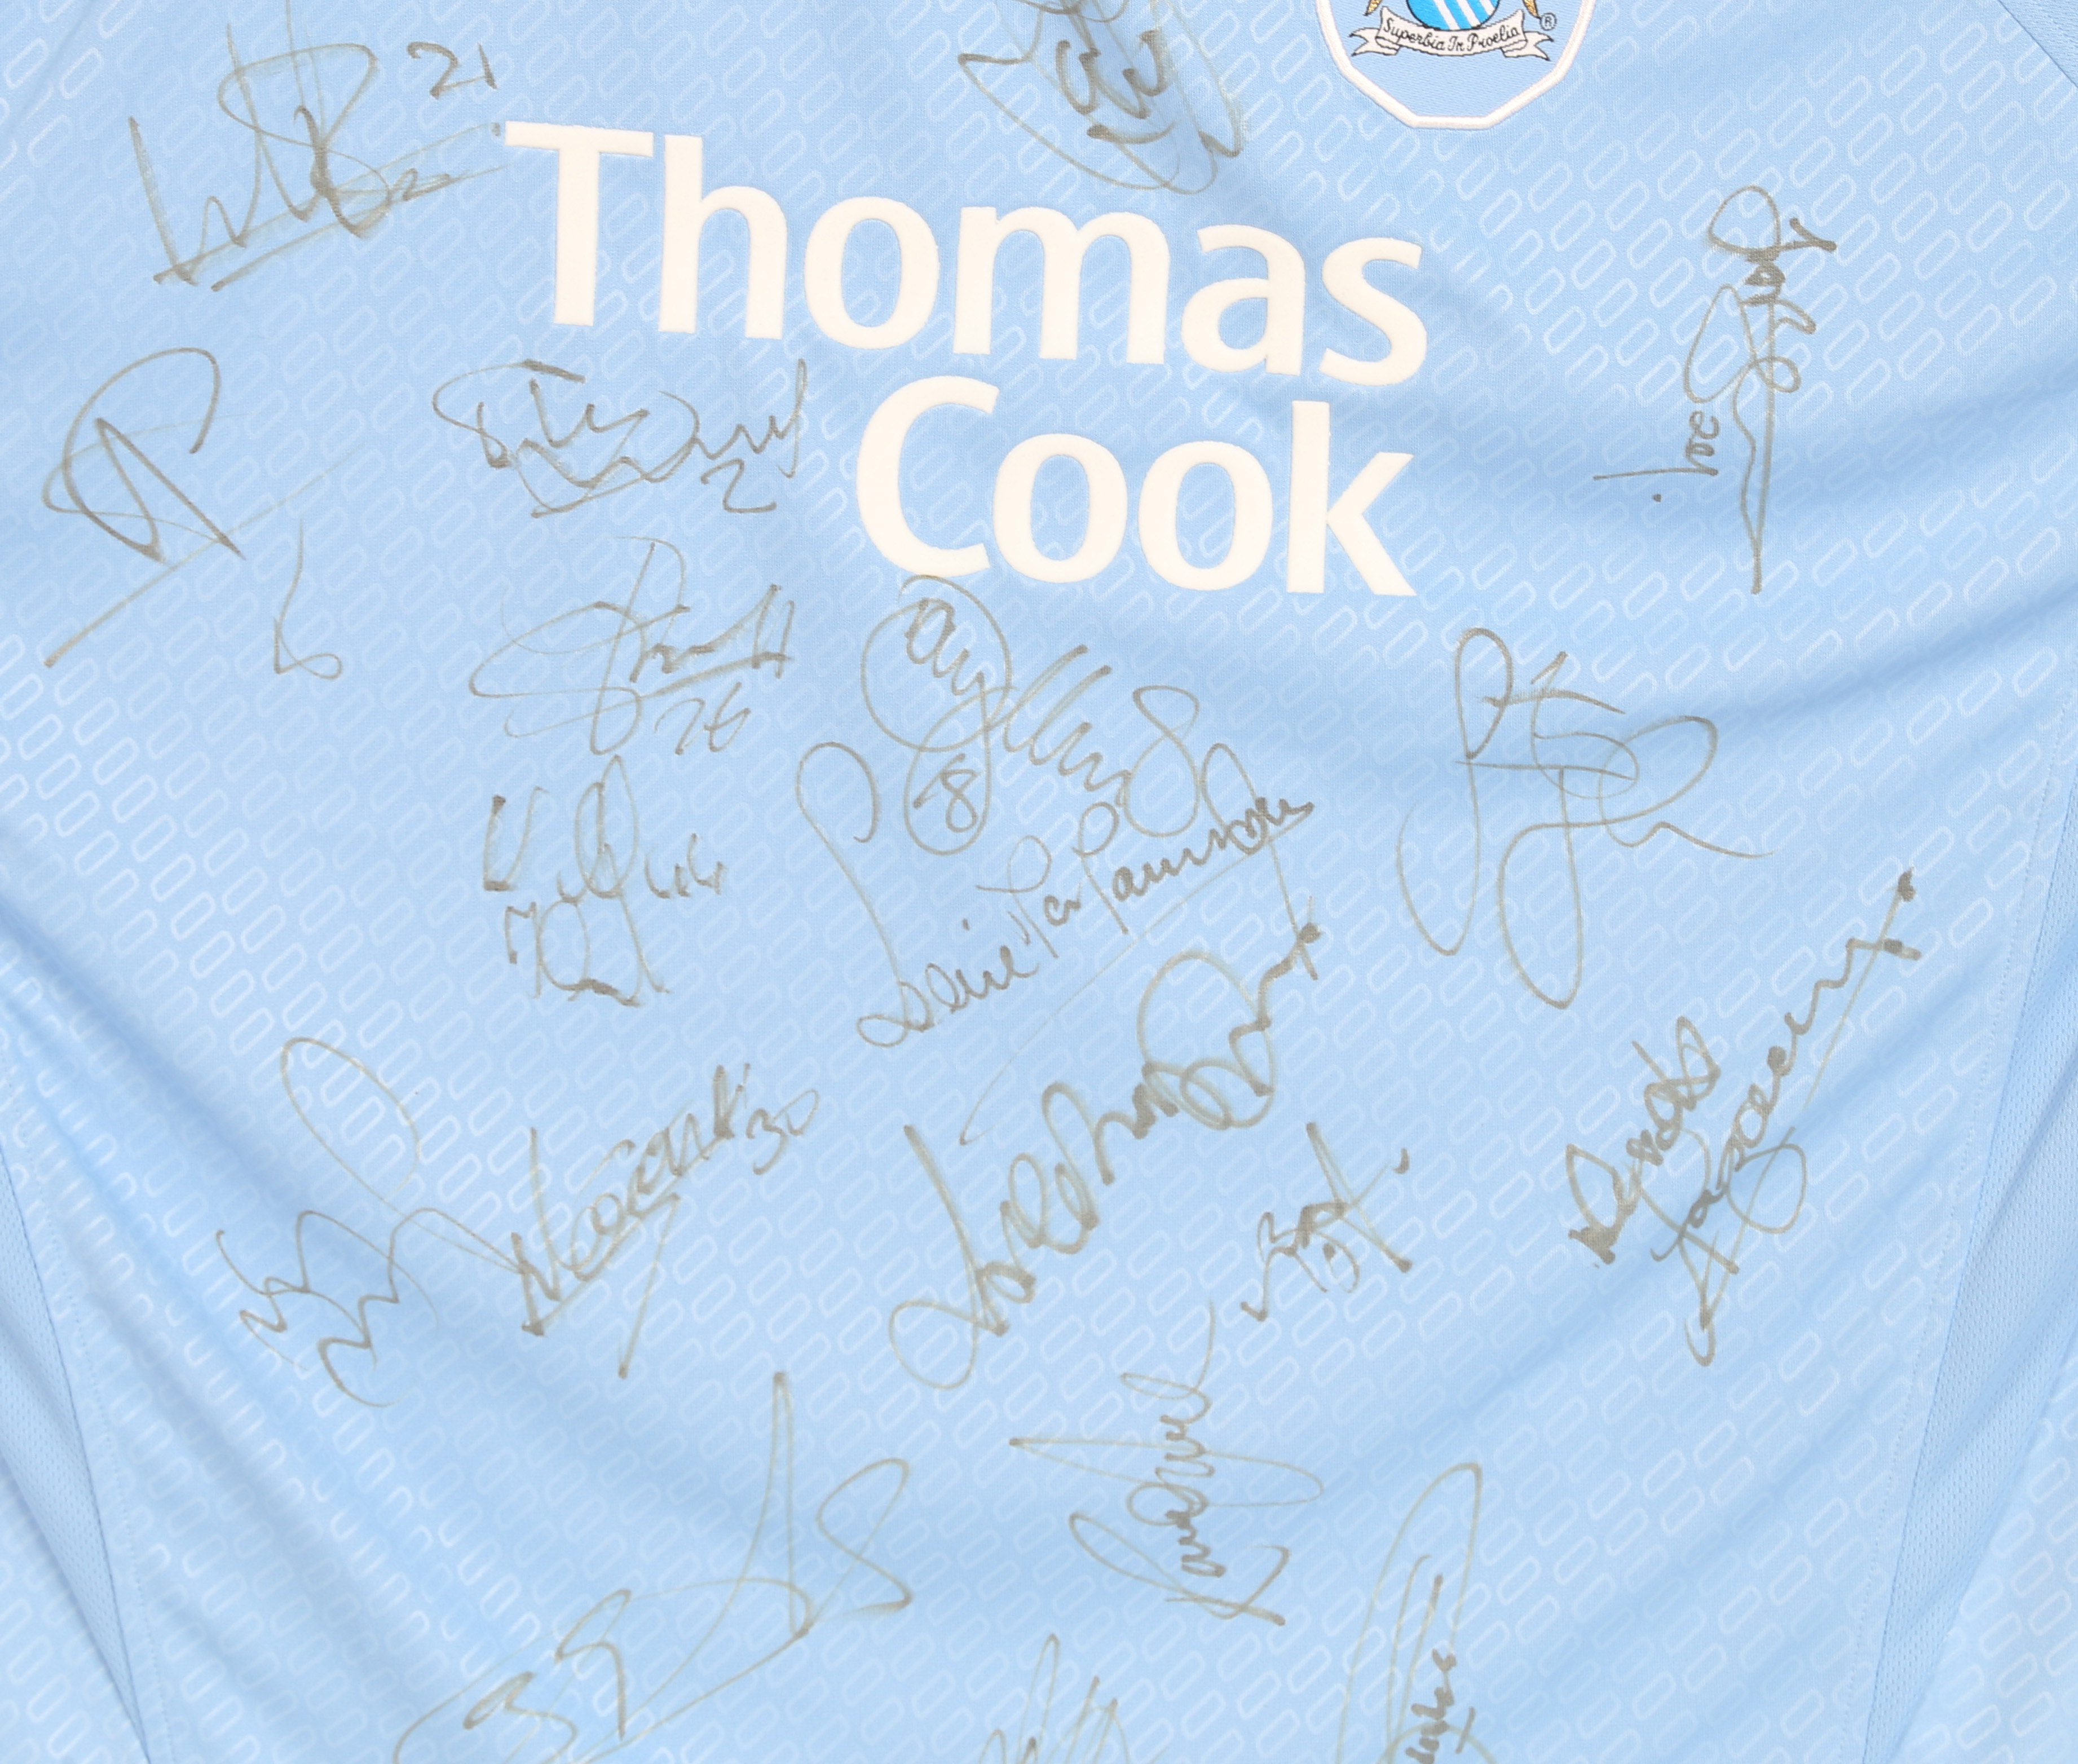 Manchester City F.C. 2004/05 Home shirt (UK L) autographed by Robbie Fowler, Joey Barton, David - Image 3 of 5